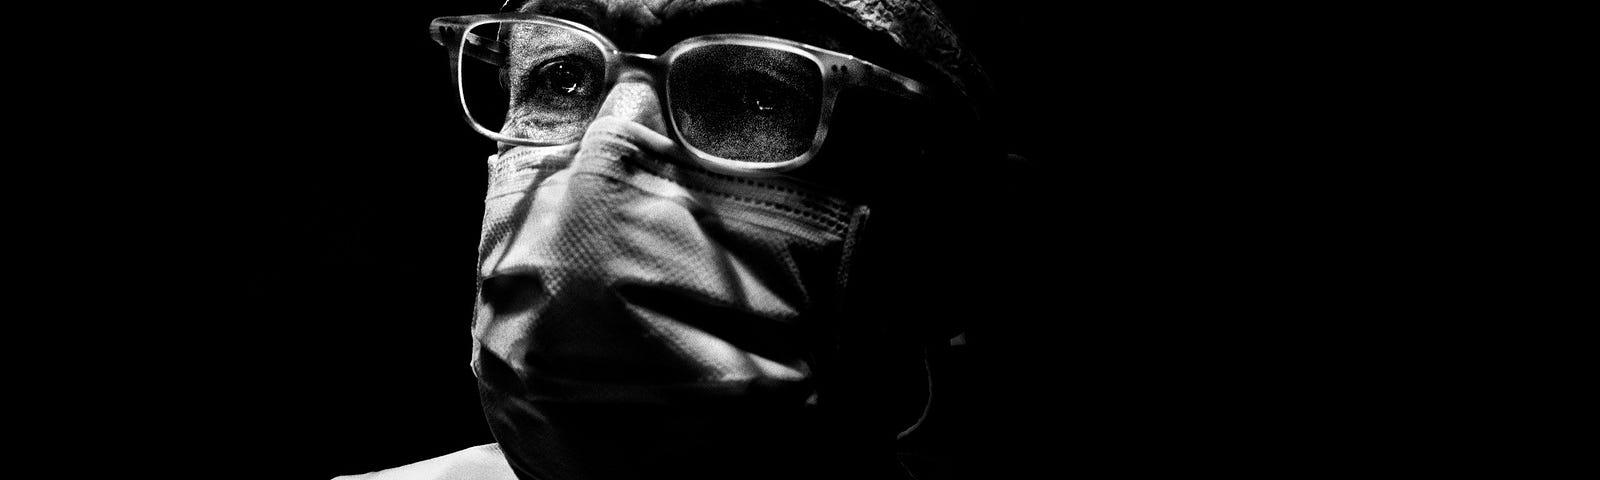 Shadowy black and white picture of a medical professional in a mask and glasses.